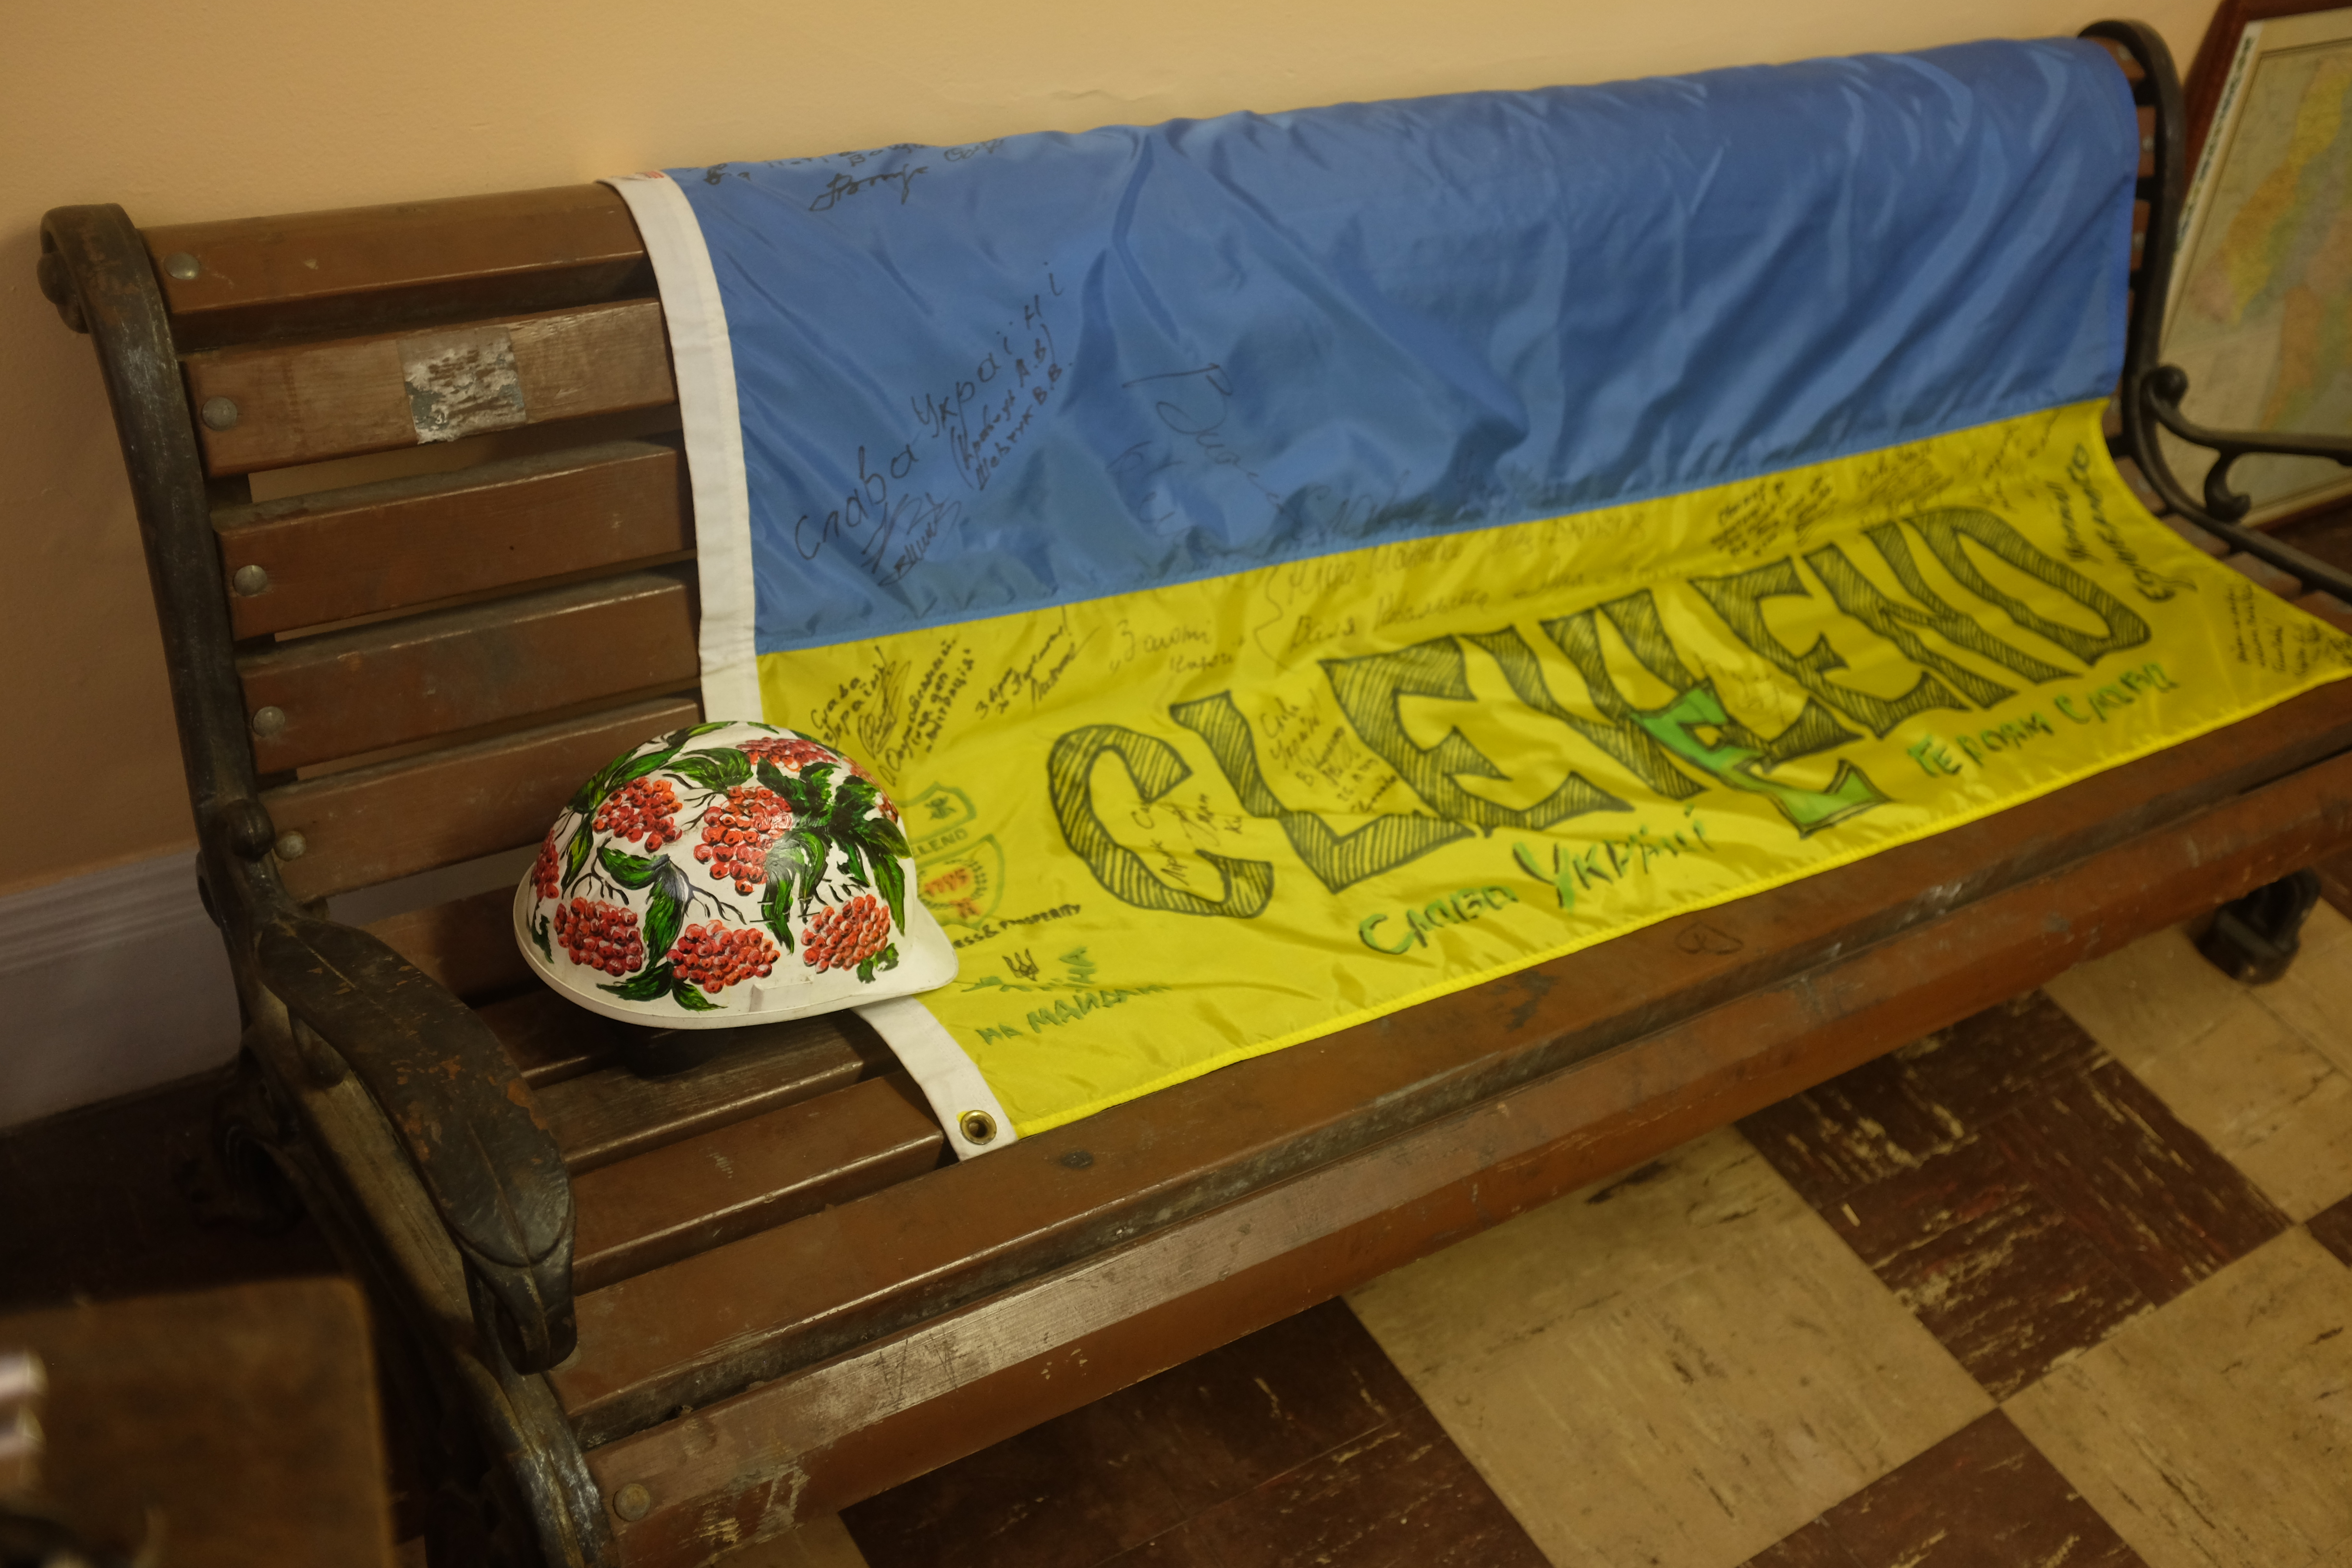 Bench from EuroMaidan Protests in Kyiv, 2014. Artifact.